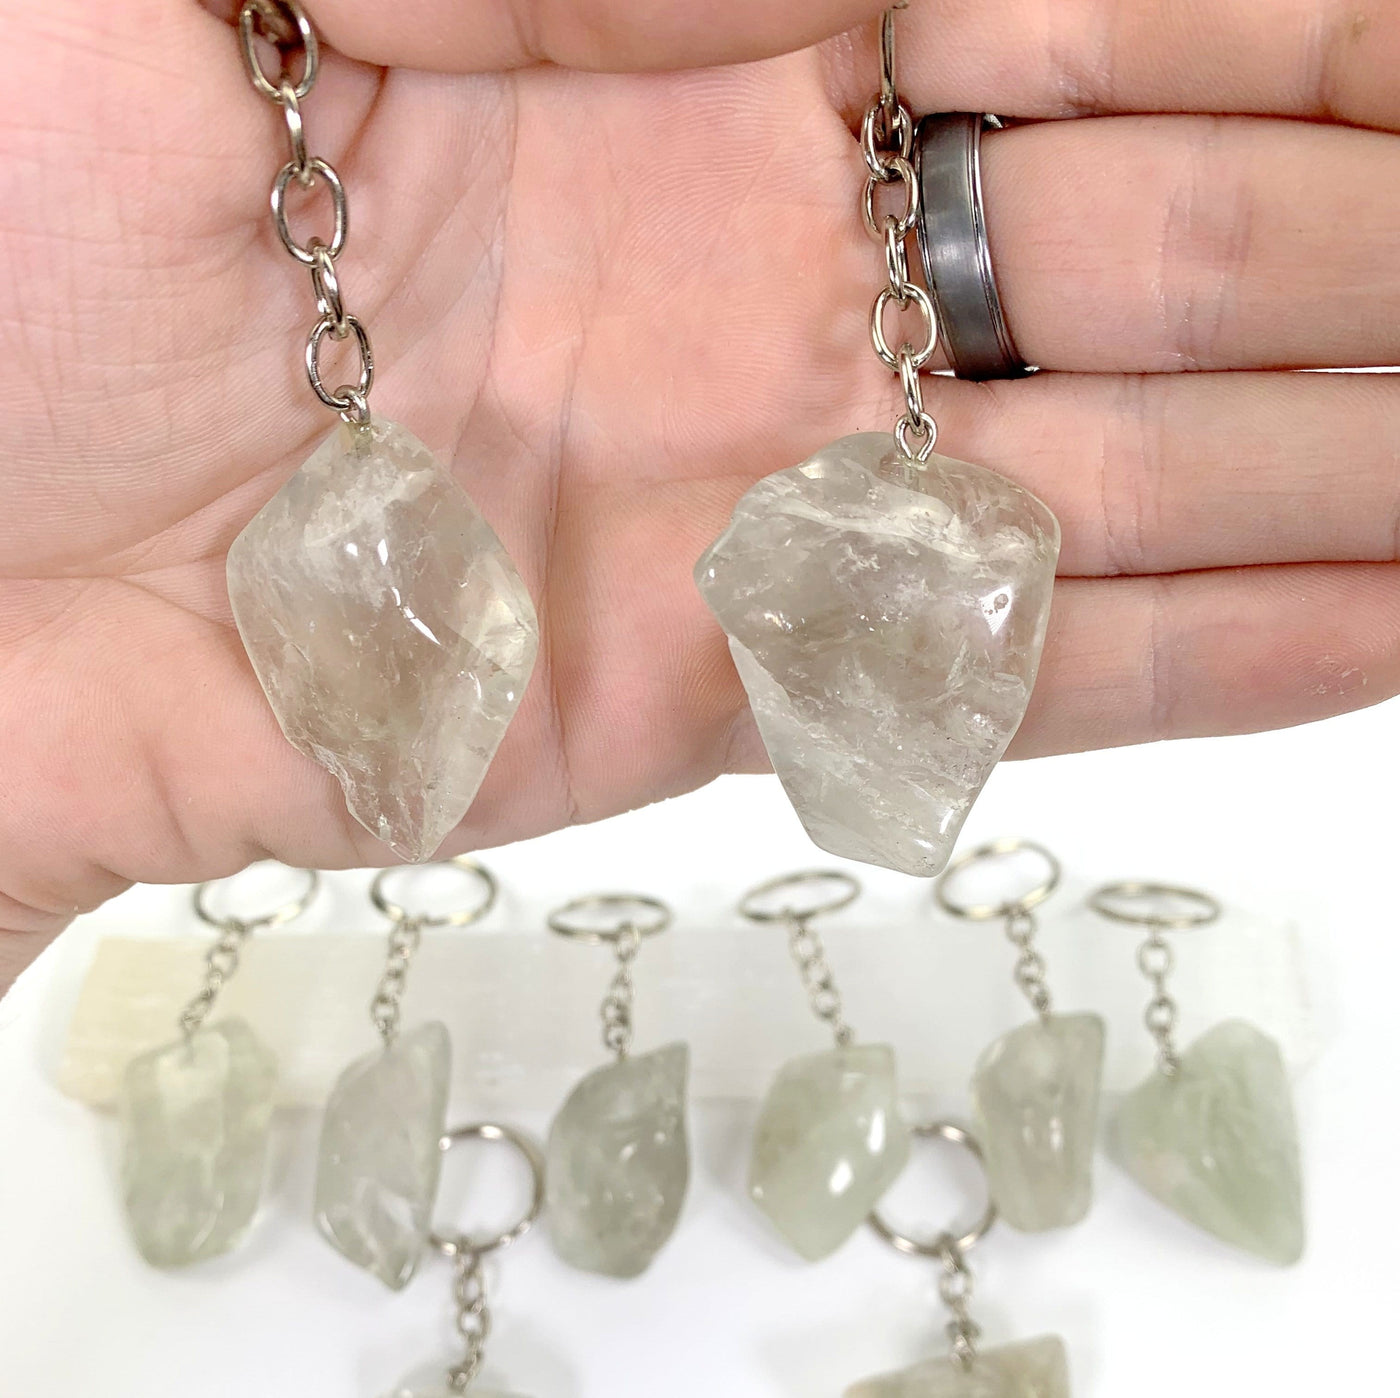 hand holding up 2 prasiolite keychains with others blurred in the background